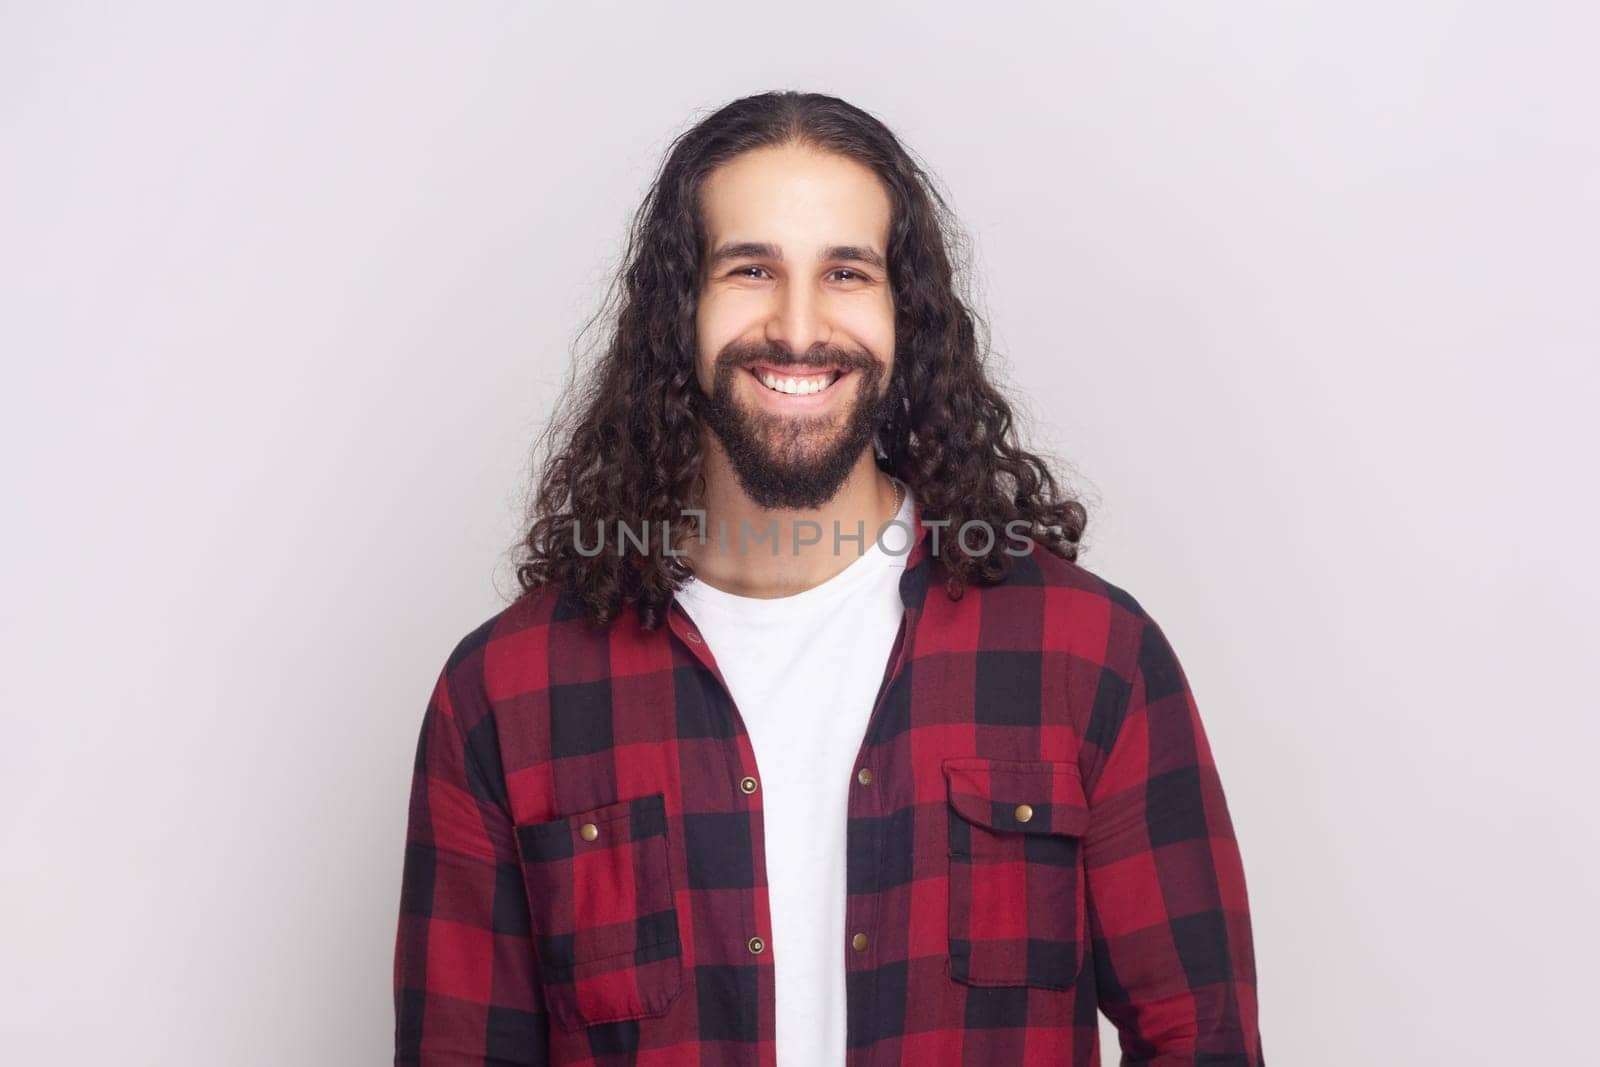 Portrait of satisfied cheerful handsome bearded man with long curly hair in checkered red shirt looks at camera, glad to find suitable well paid job. Indoor studio shot isolated on gray background.